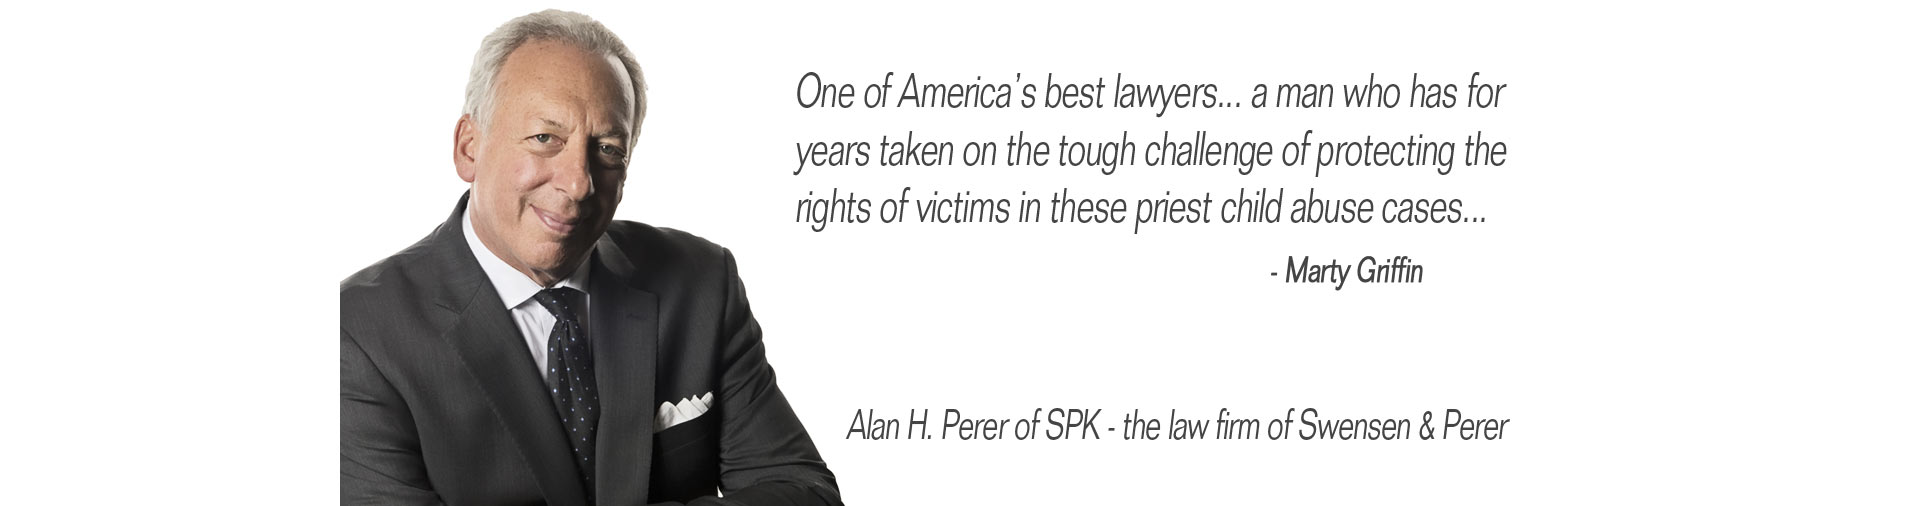 One of America's best lawyers...a man who has for years taken on the tough challenge of protecting the rights of vitims in these priest child abuse cases... quote Mary Griffin on Alan H. Perer of SPK - The law firm of Swensen & Perer